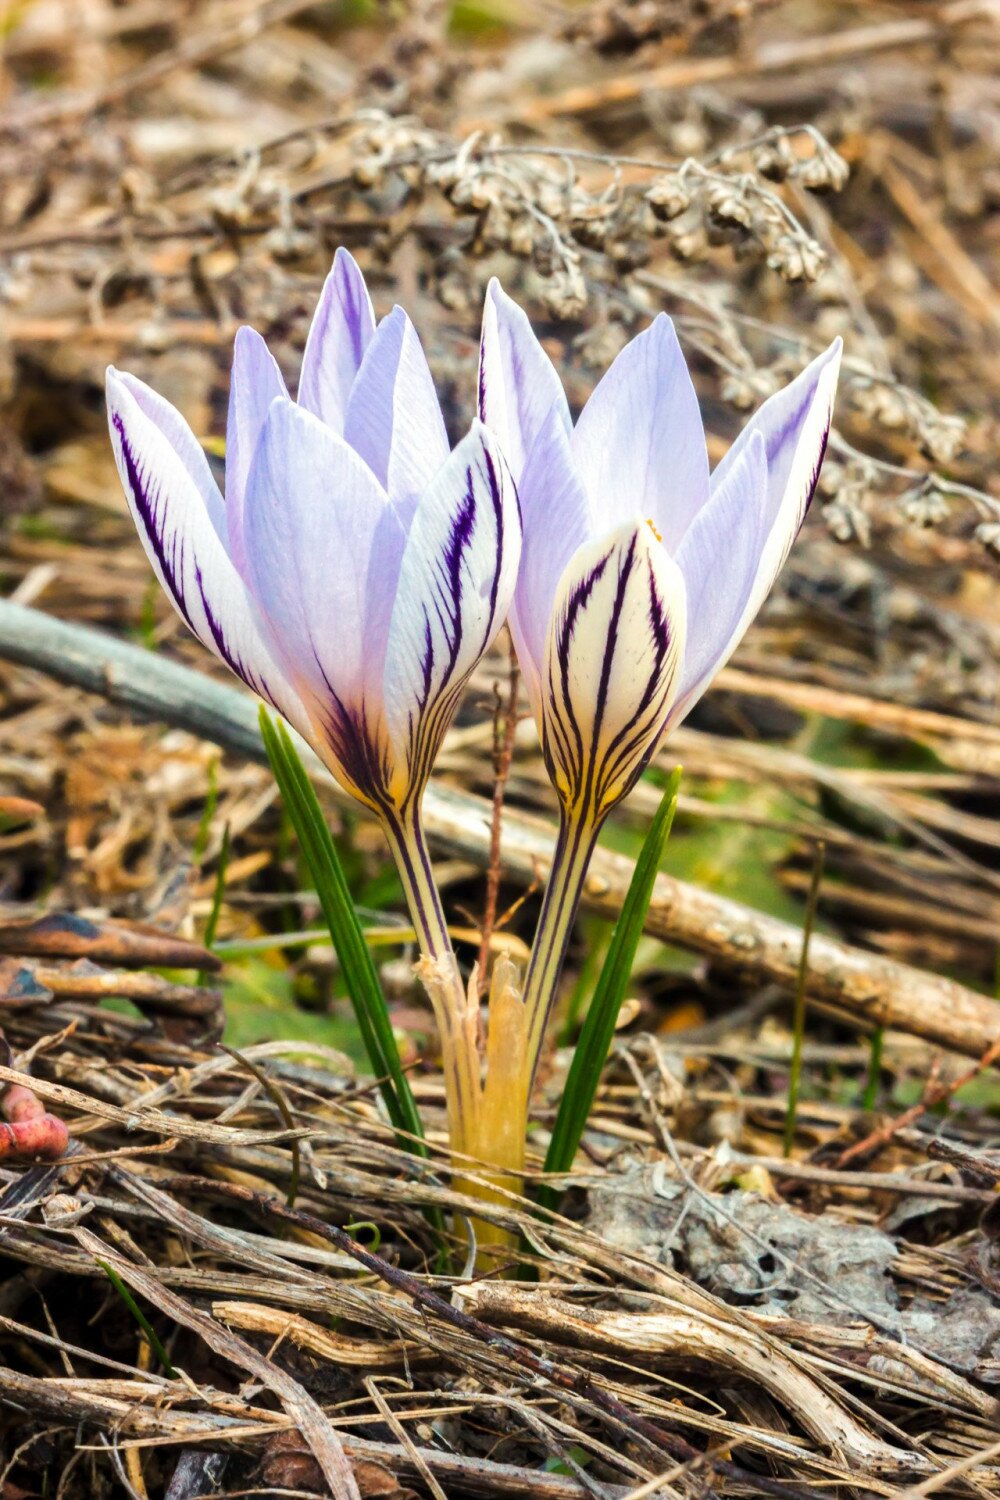 Two spring wild flowers Crocus reticulatus among dry last year grasses at the meadow.